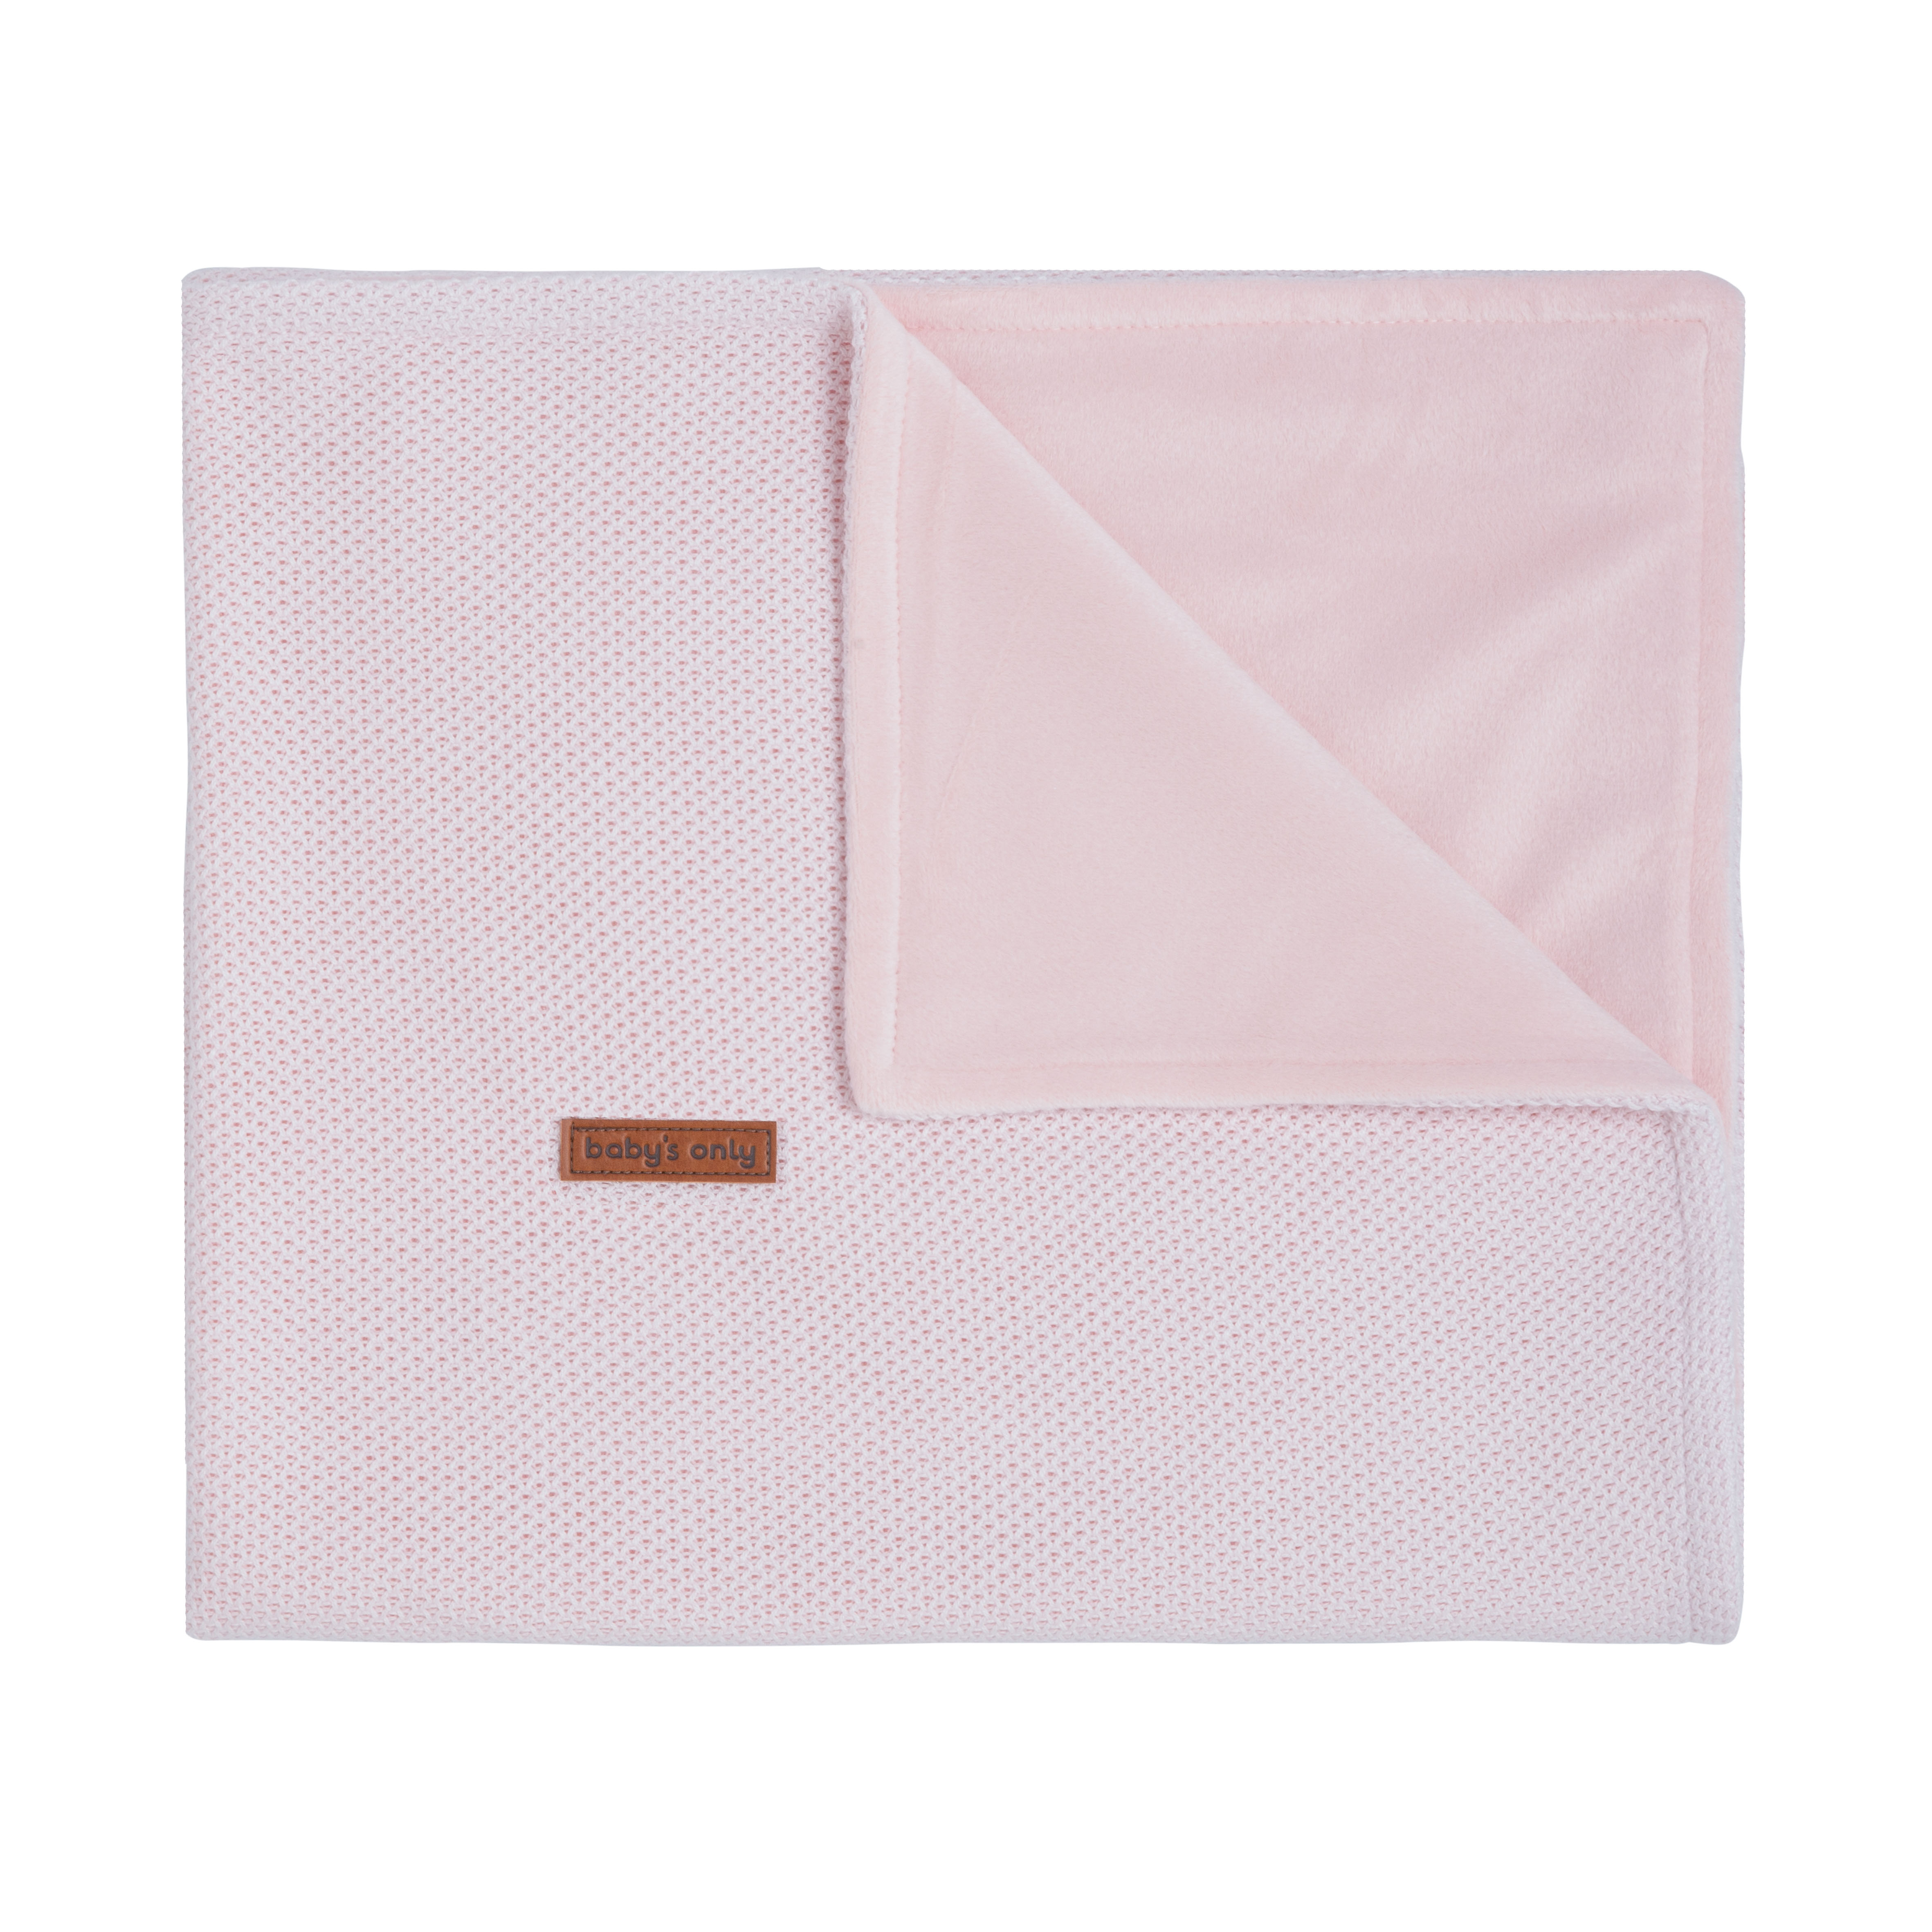 Cot blanket soft Classic pink